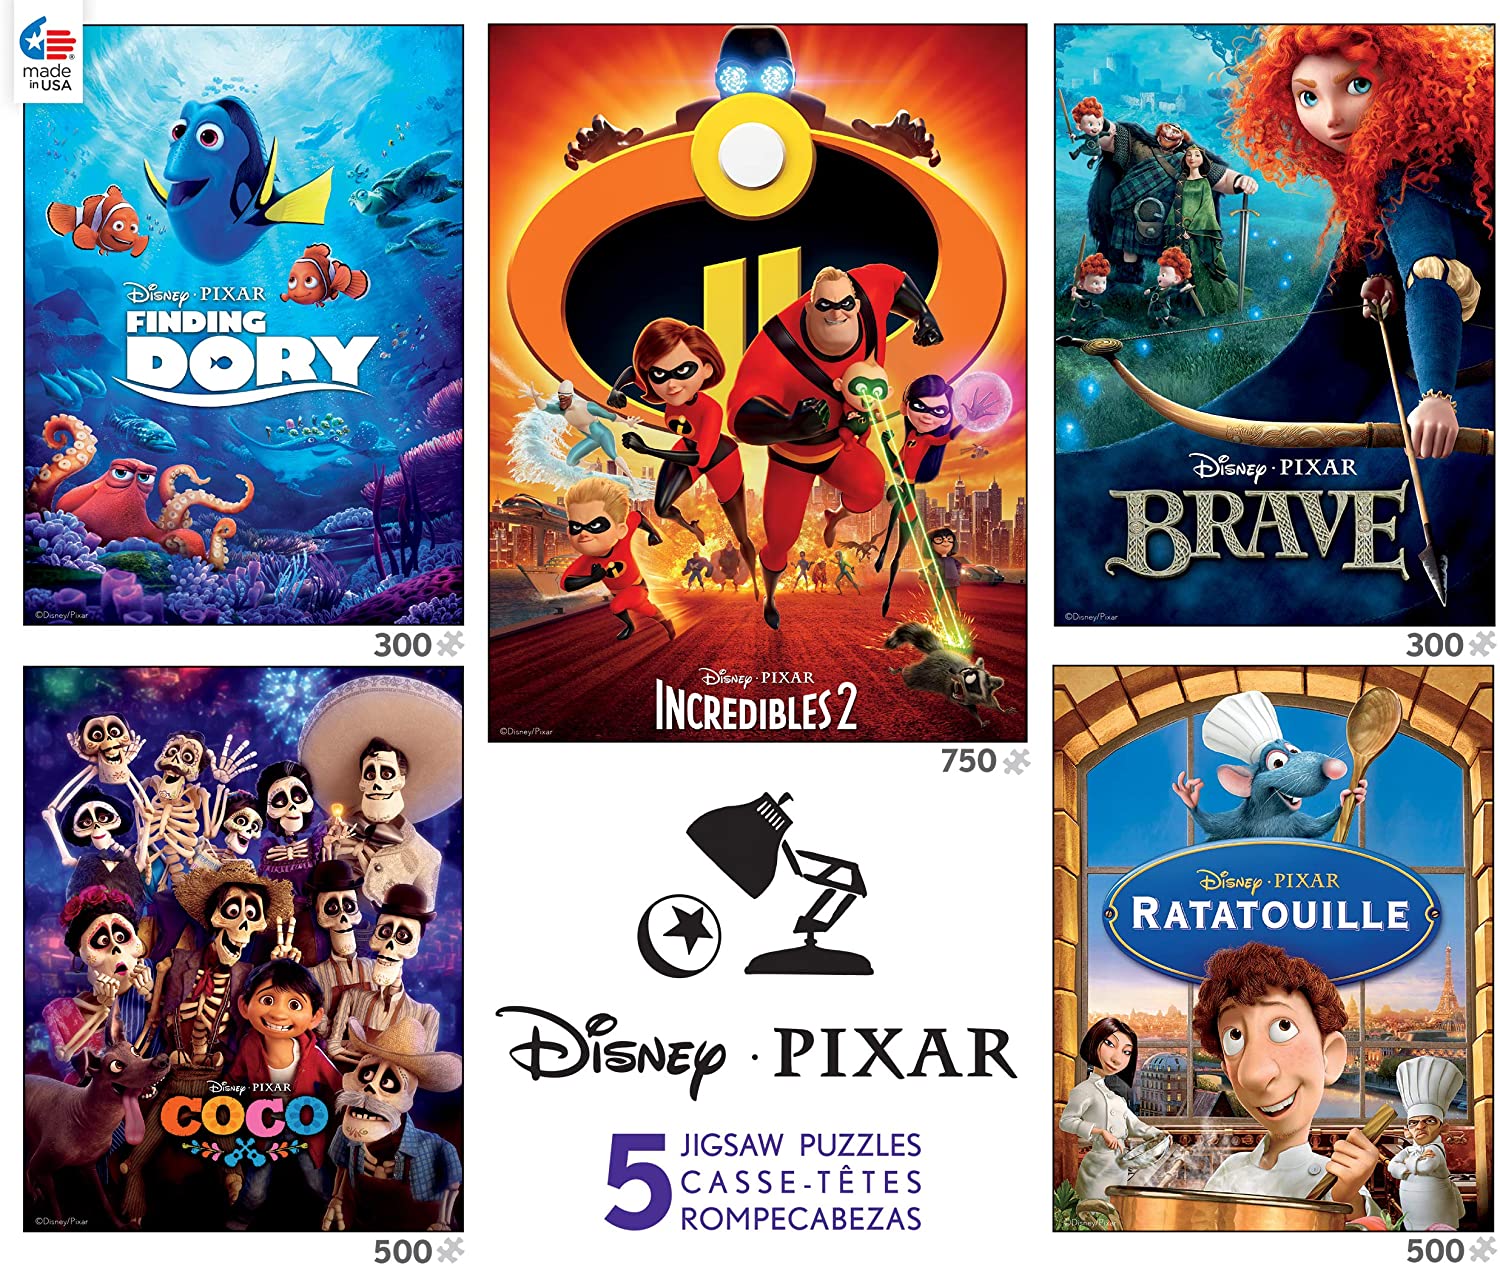 Disney Pixar 5-in-1 Multipack Puzzles Includes - Finding Dory, The Incredibles 2, Brave, Coco, and Ratatouille